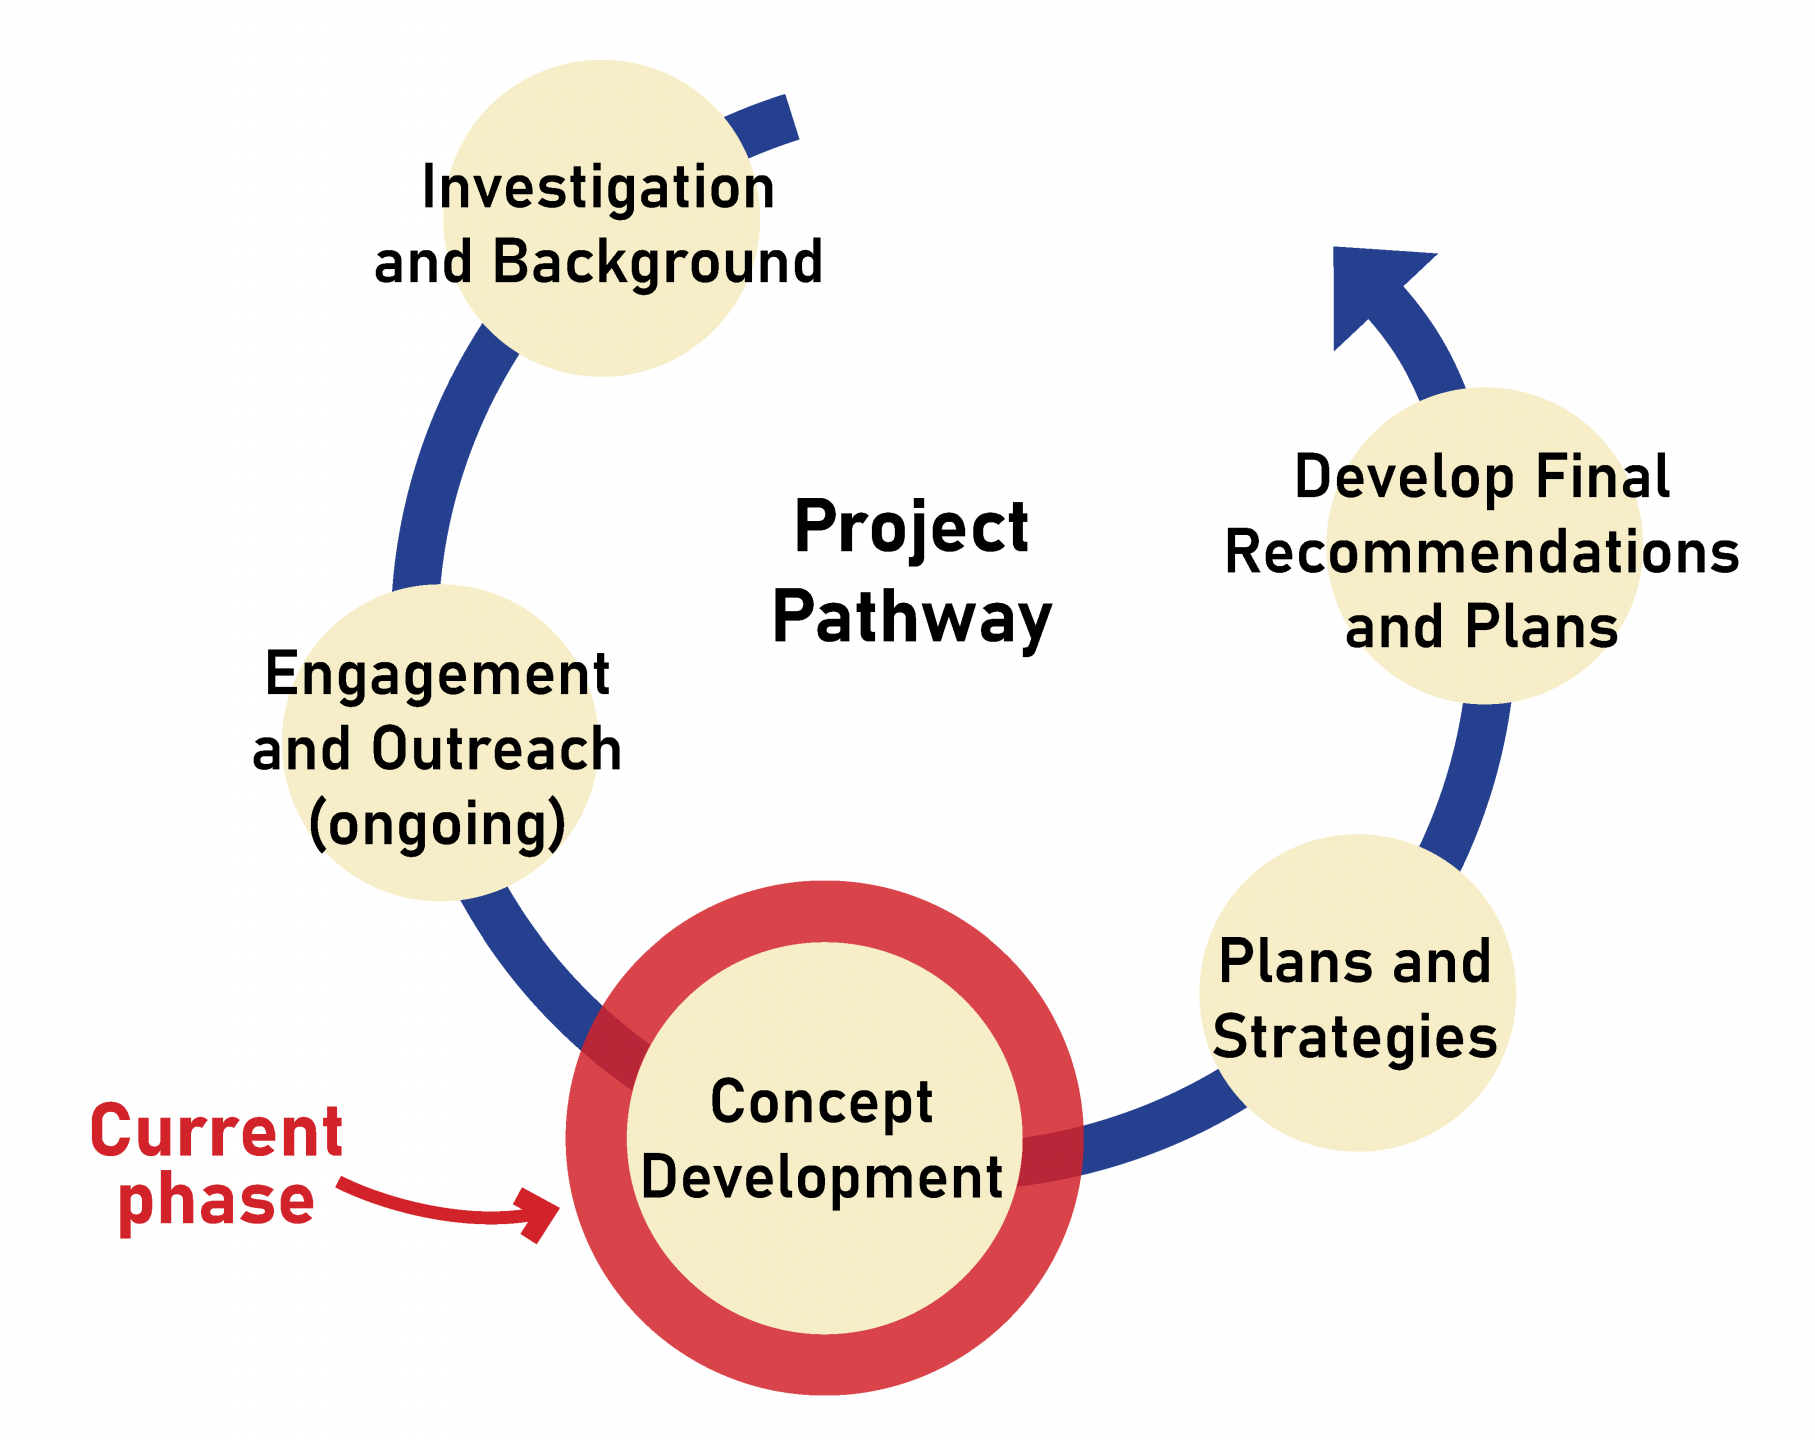 project status diagram - currently in Concept Development phase